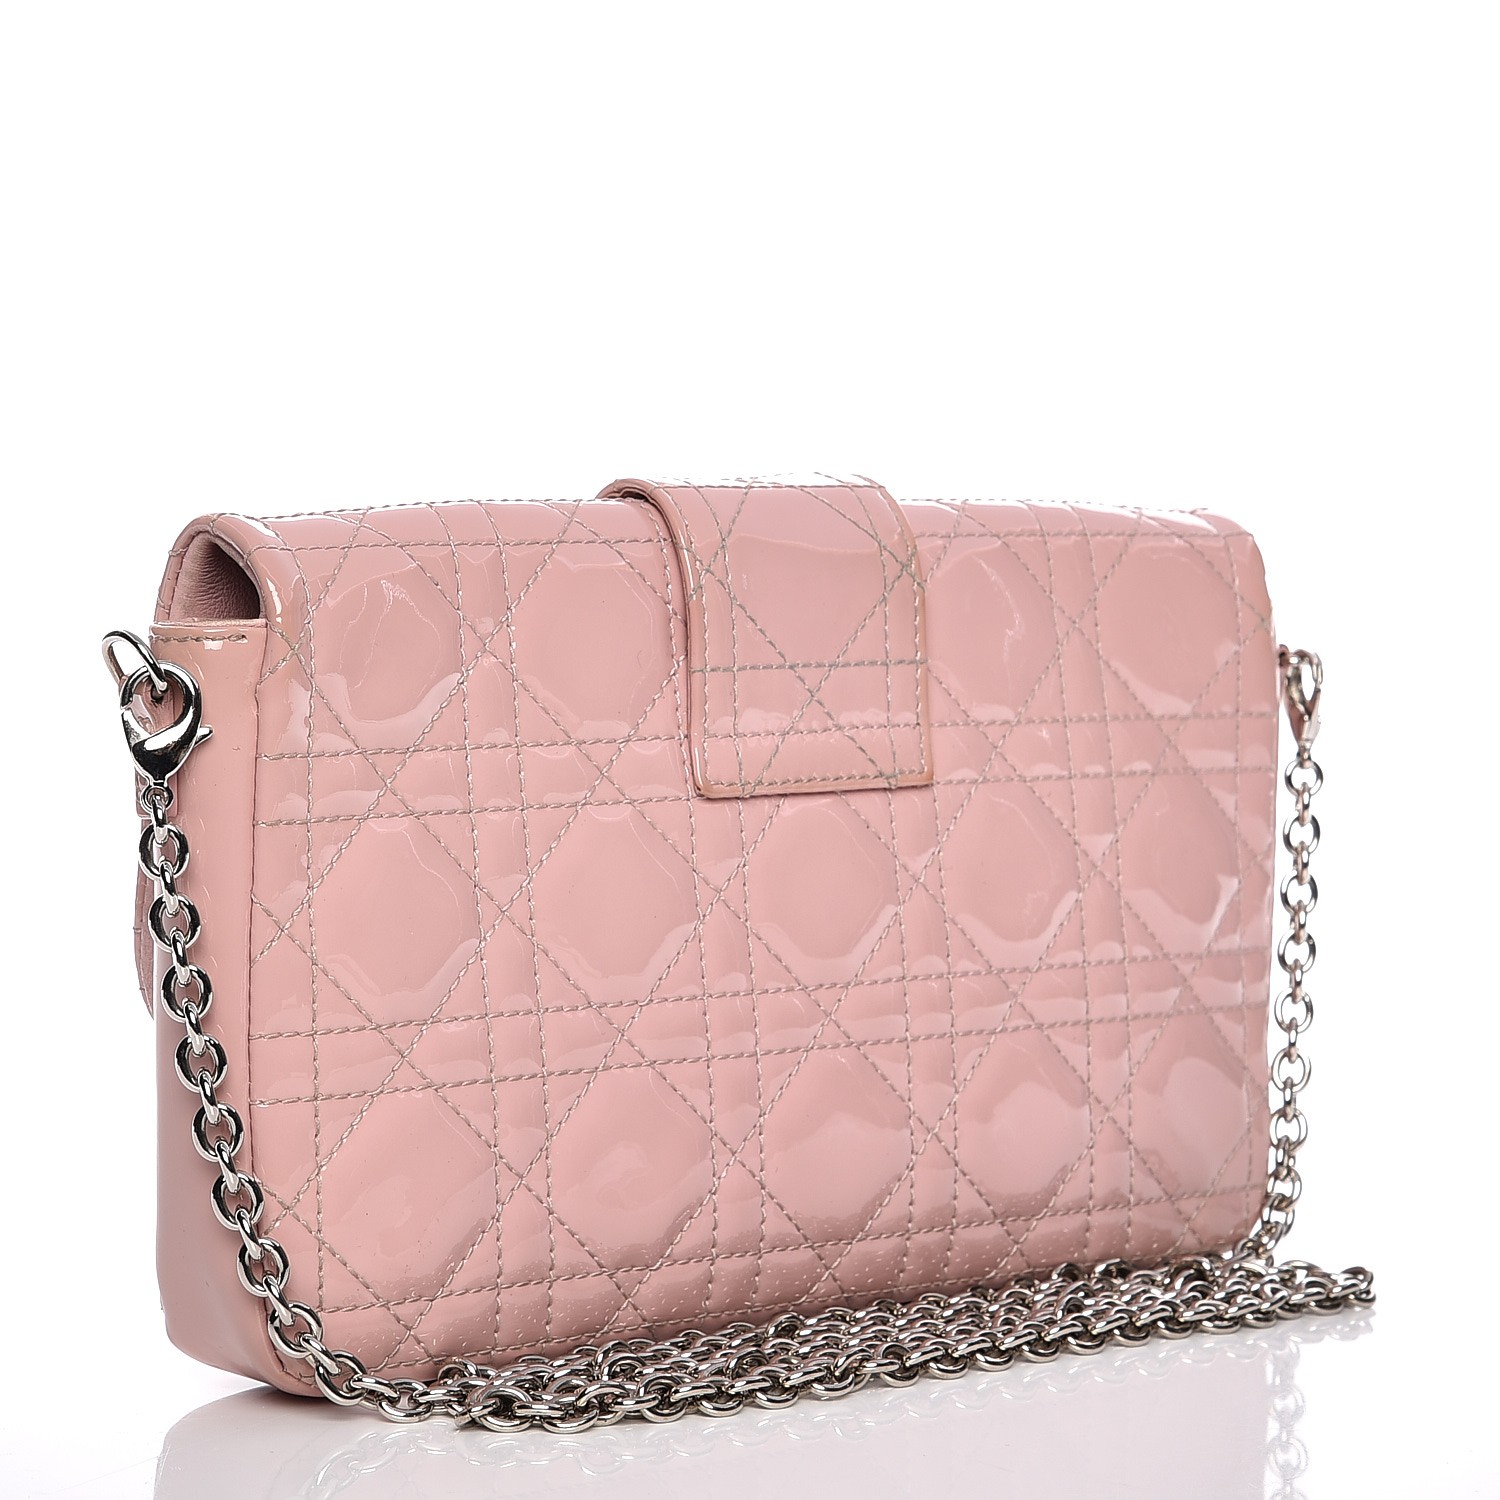 CHRISTIAN DIOR Patent Cannage New Lock Pouch Light Pink 214738